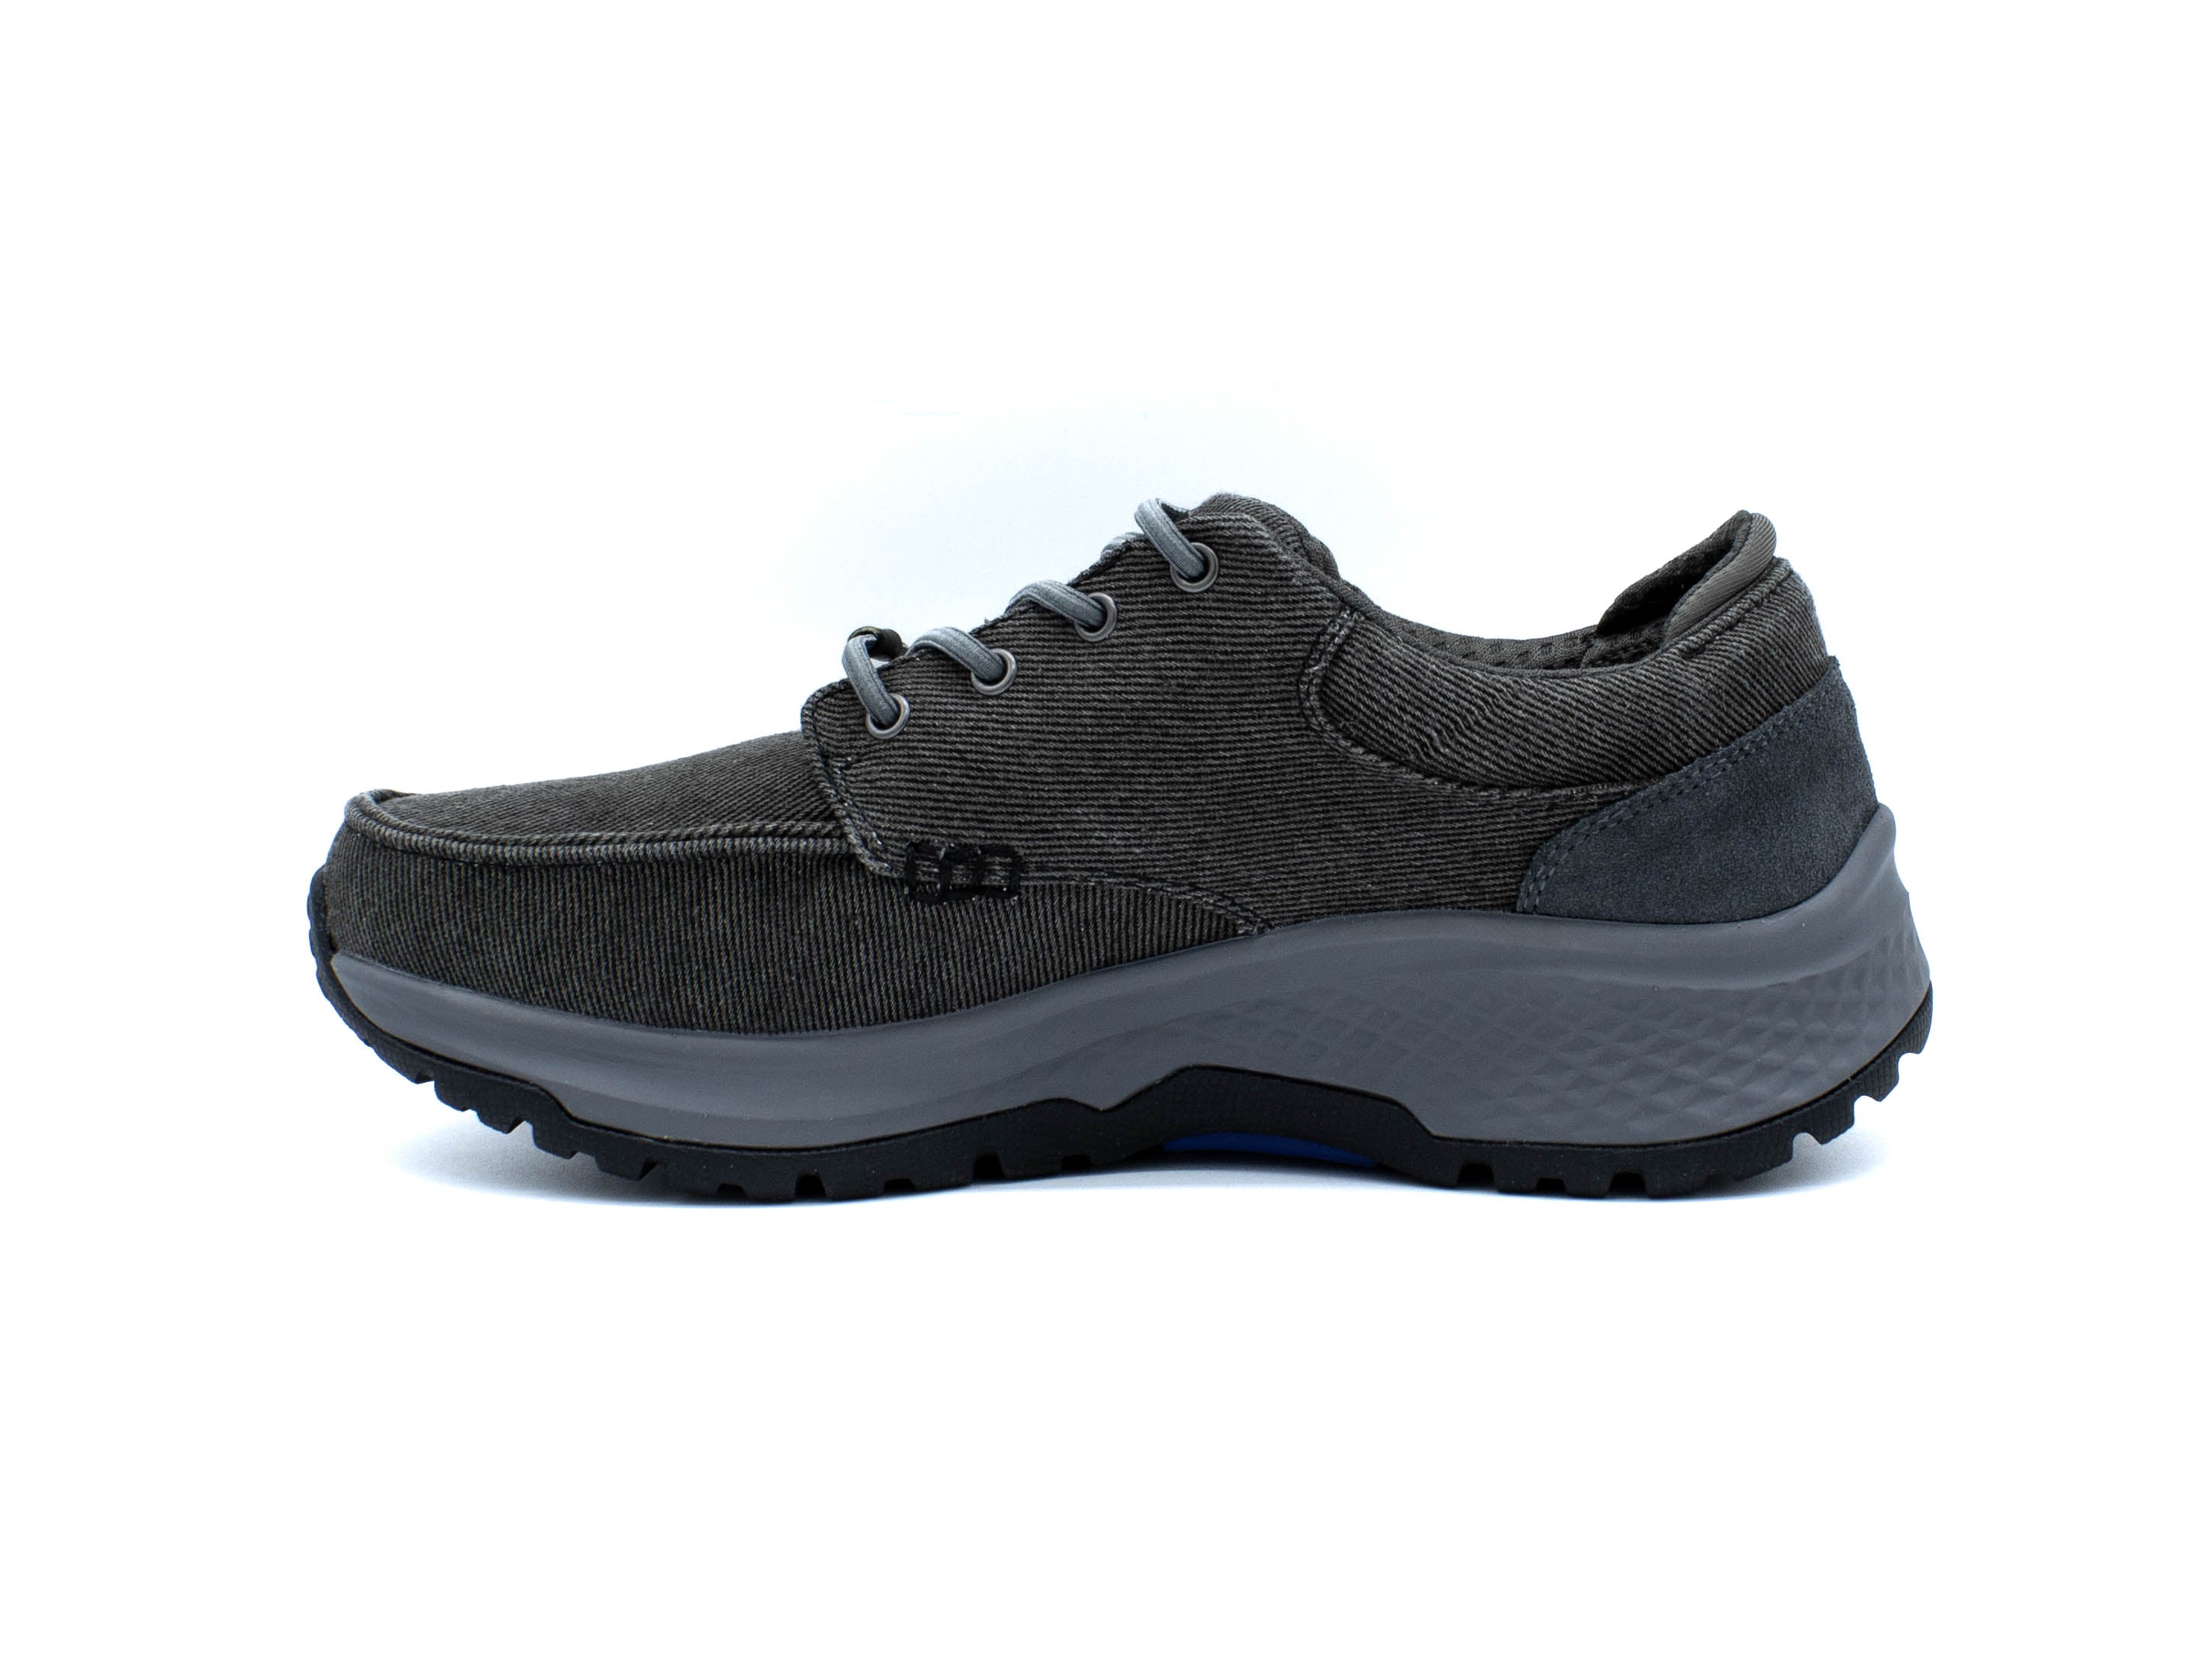 SKECHERS Arch Fit Ripple Poliver Wide Width Oxford